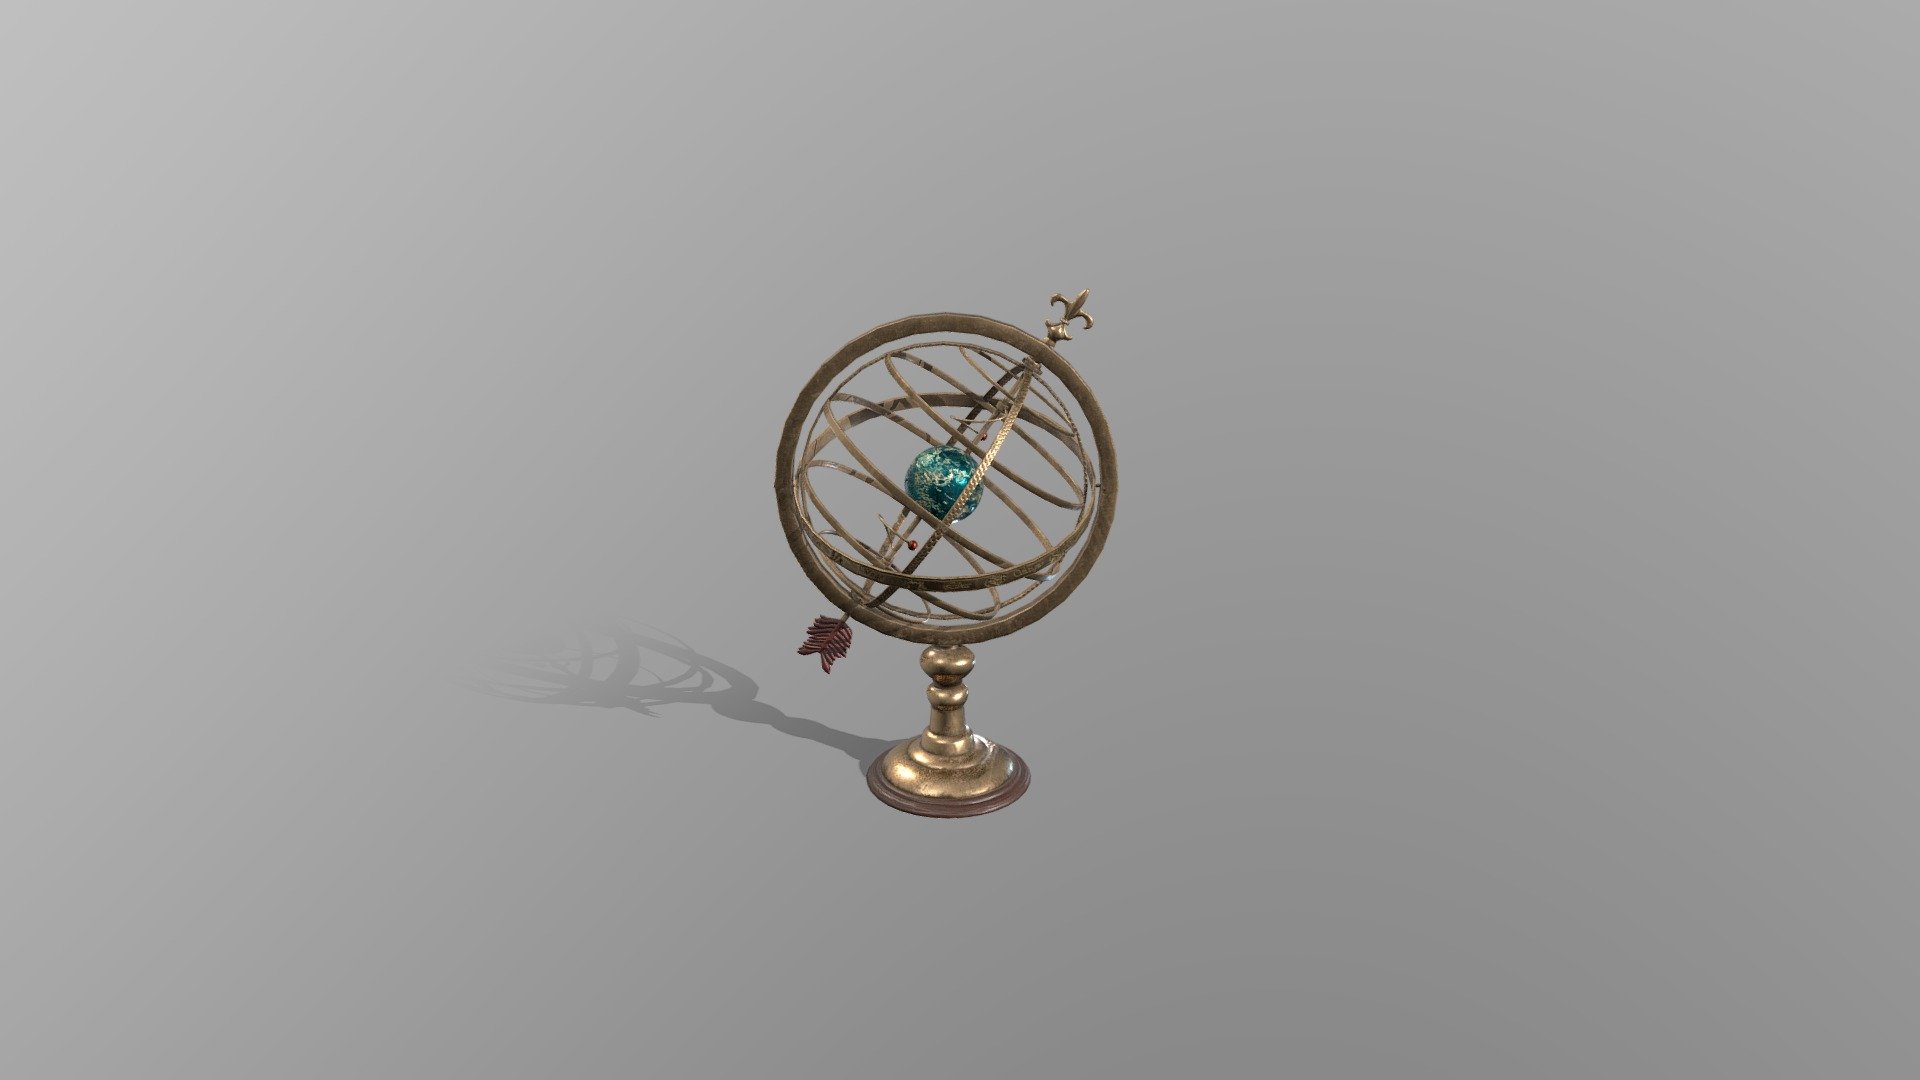 Armillary Sphere for a Pirate ship
Armillary spheres are ancient astronomical instruments that were used mainly by astronomers to observe the equator, tropics, and other celestial circles. They were also used by sailors to determine the position of the sun and stars during their voyages, establishing coordinates and tracking the path of the sun on any given day of the year 3d model